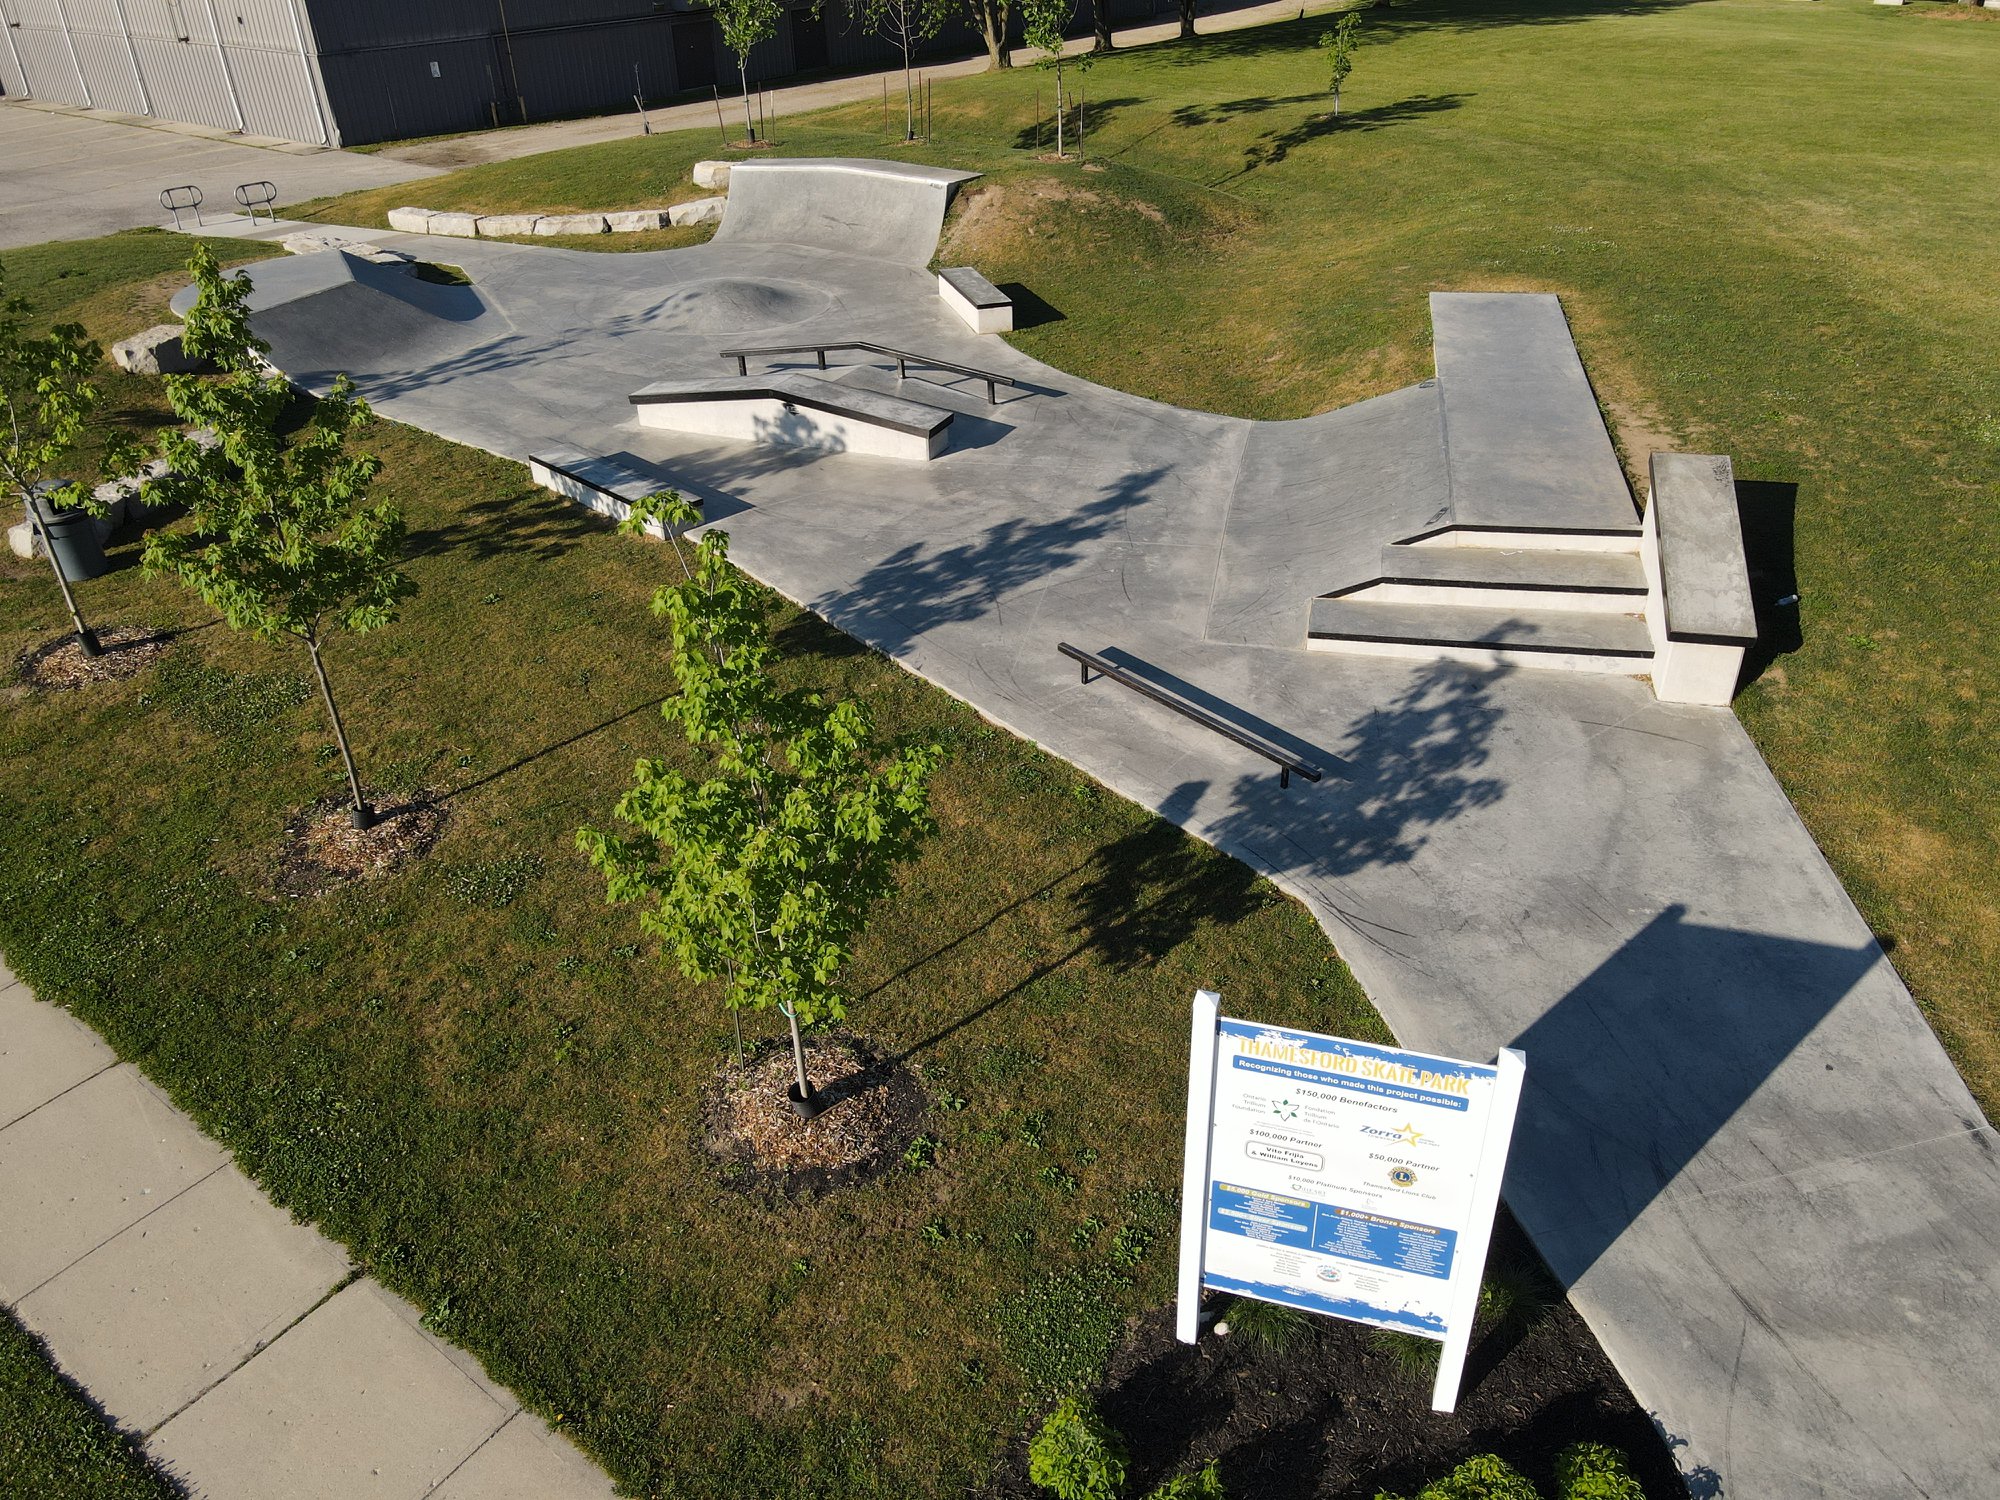 Overhead view of Skate Park